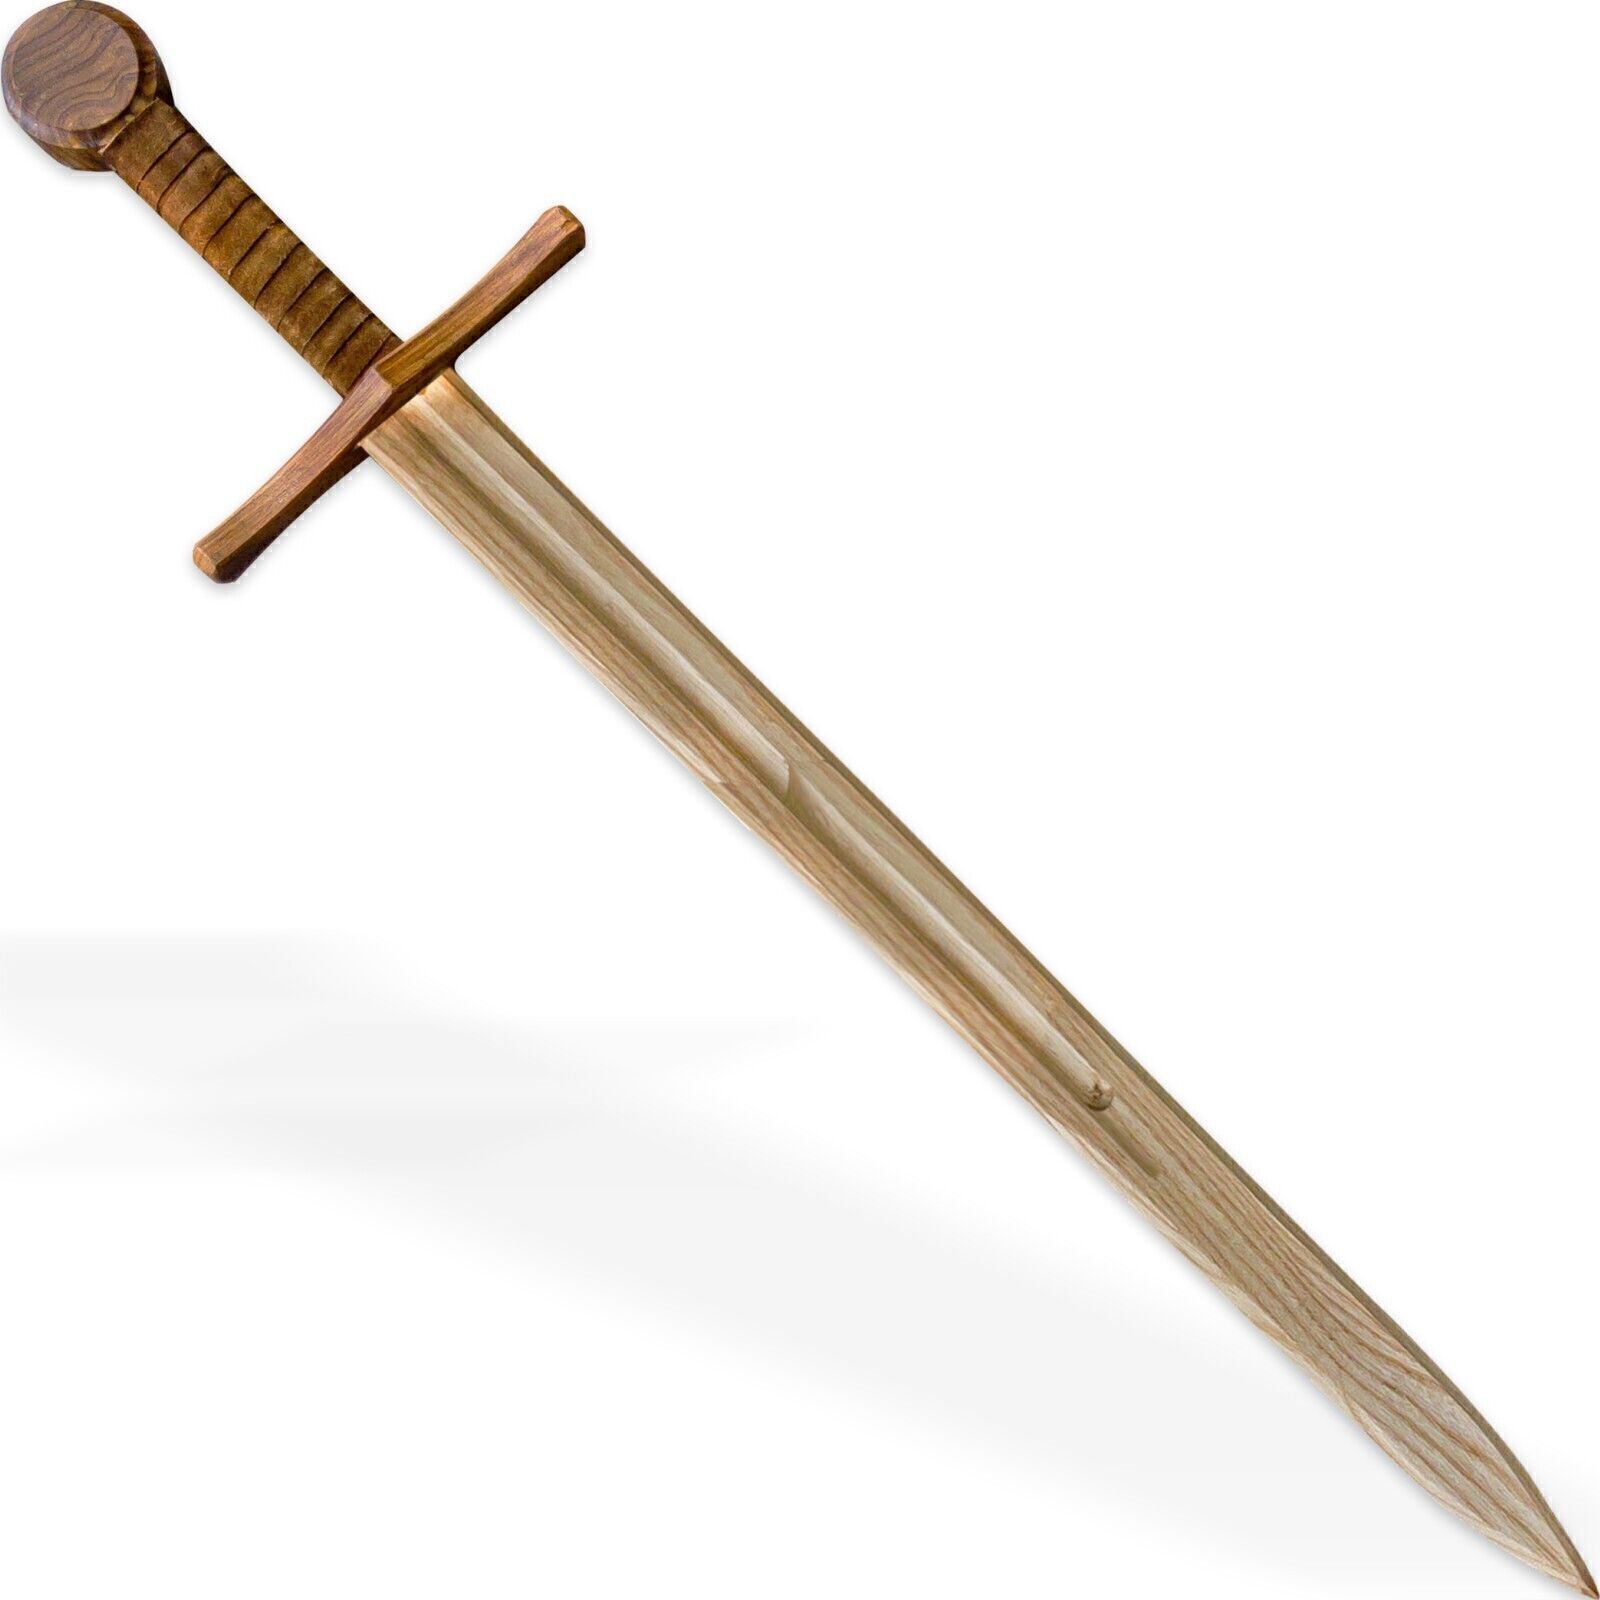 Knight Crusader Beech Wood Pretend Play Practice Sword w/ Leather Wrapped Handle